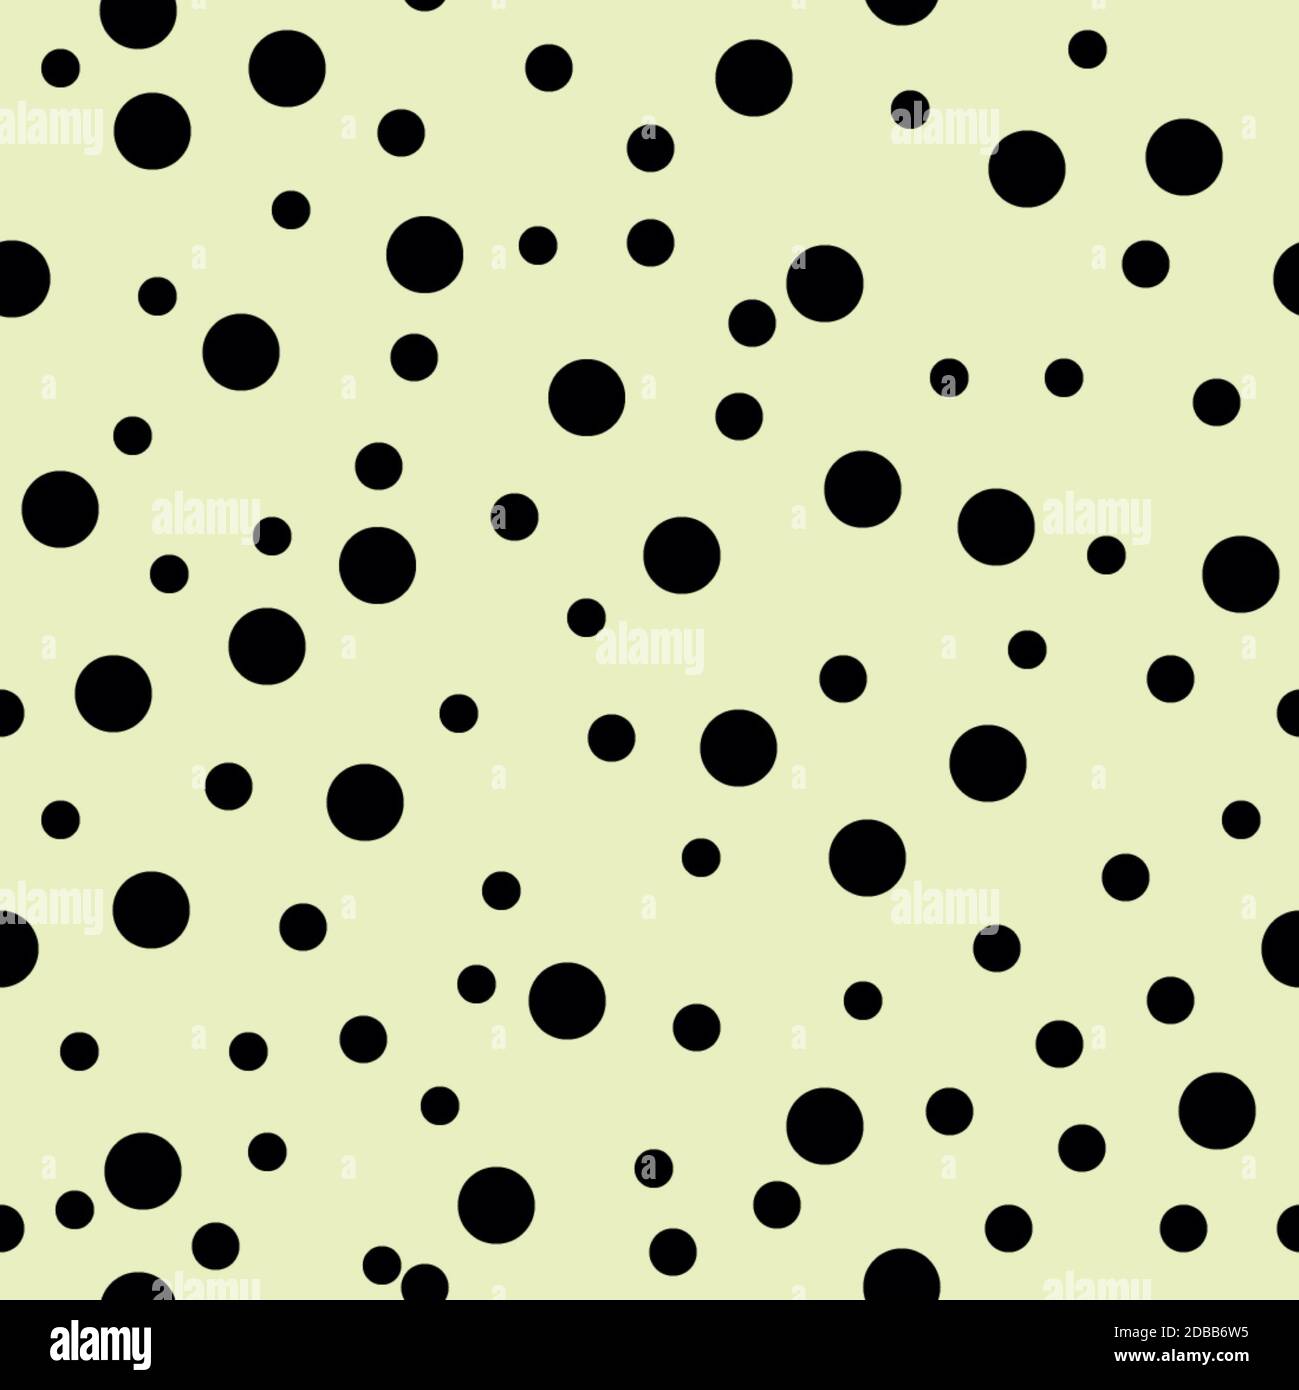 Vector black polka dots seamless pattern on white background Perfect for  fabric quilting scrapbook paper wallpaper and crafts Stock Vector Image   Art  Alamy